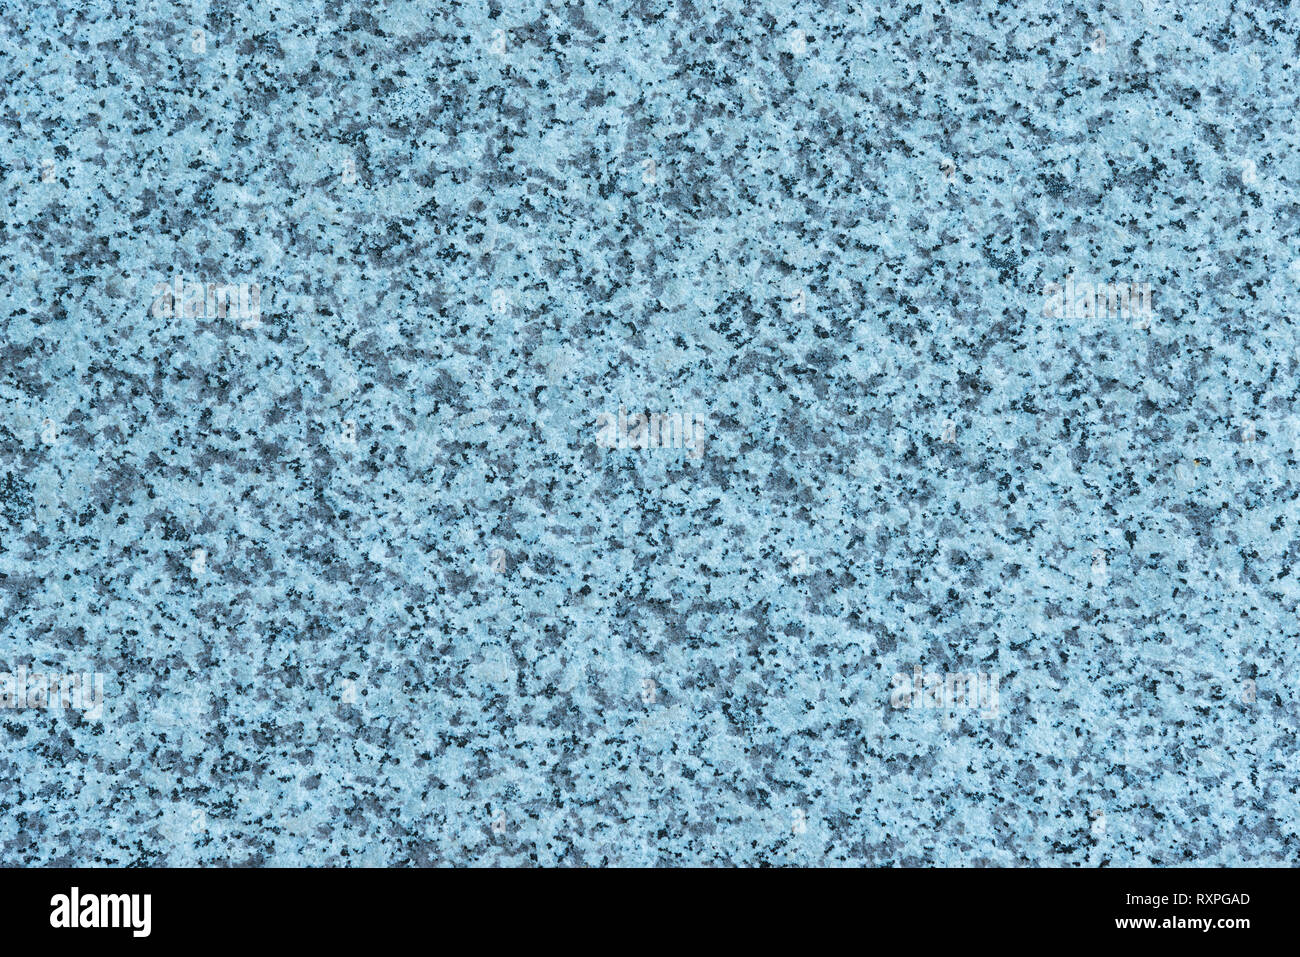 Granite wall with azure or bluish tint as background Stock Photo